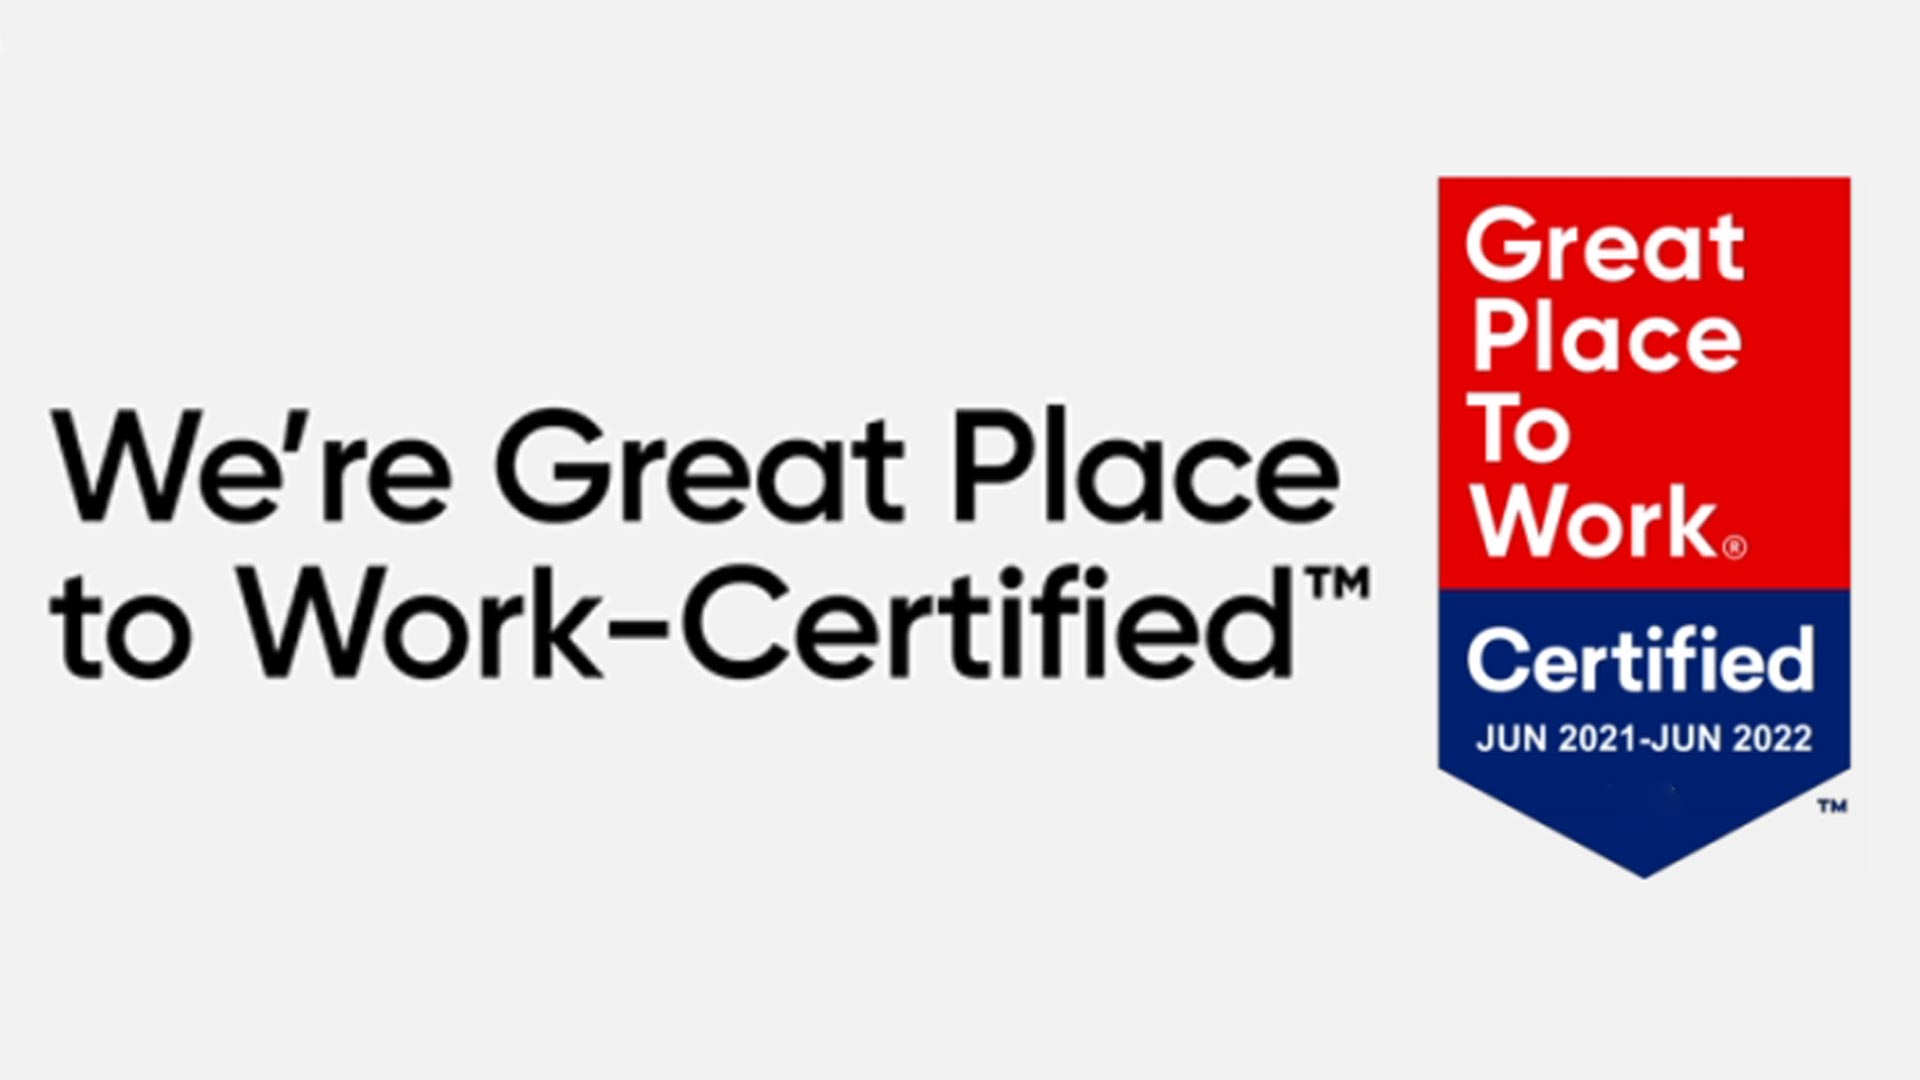 Great Place to Work Cerified Logo